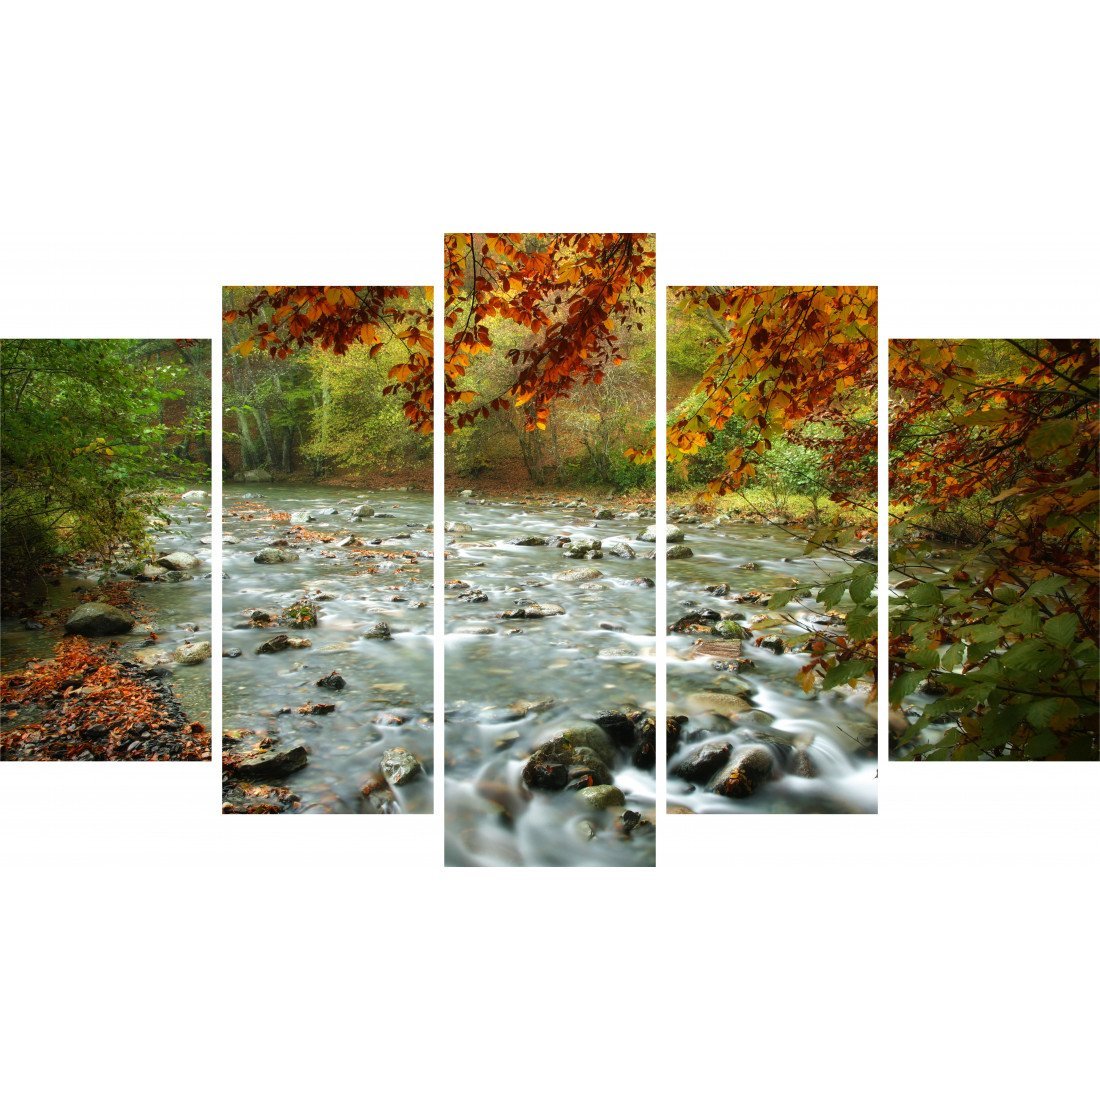 Tablou Forex 5 piese River in Autumn - clevny.ro